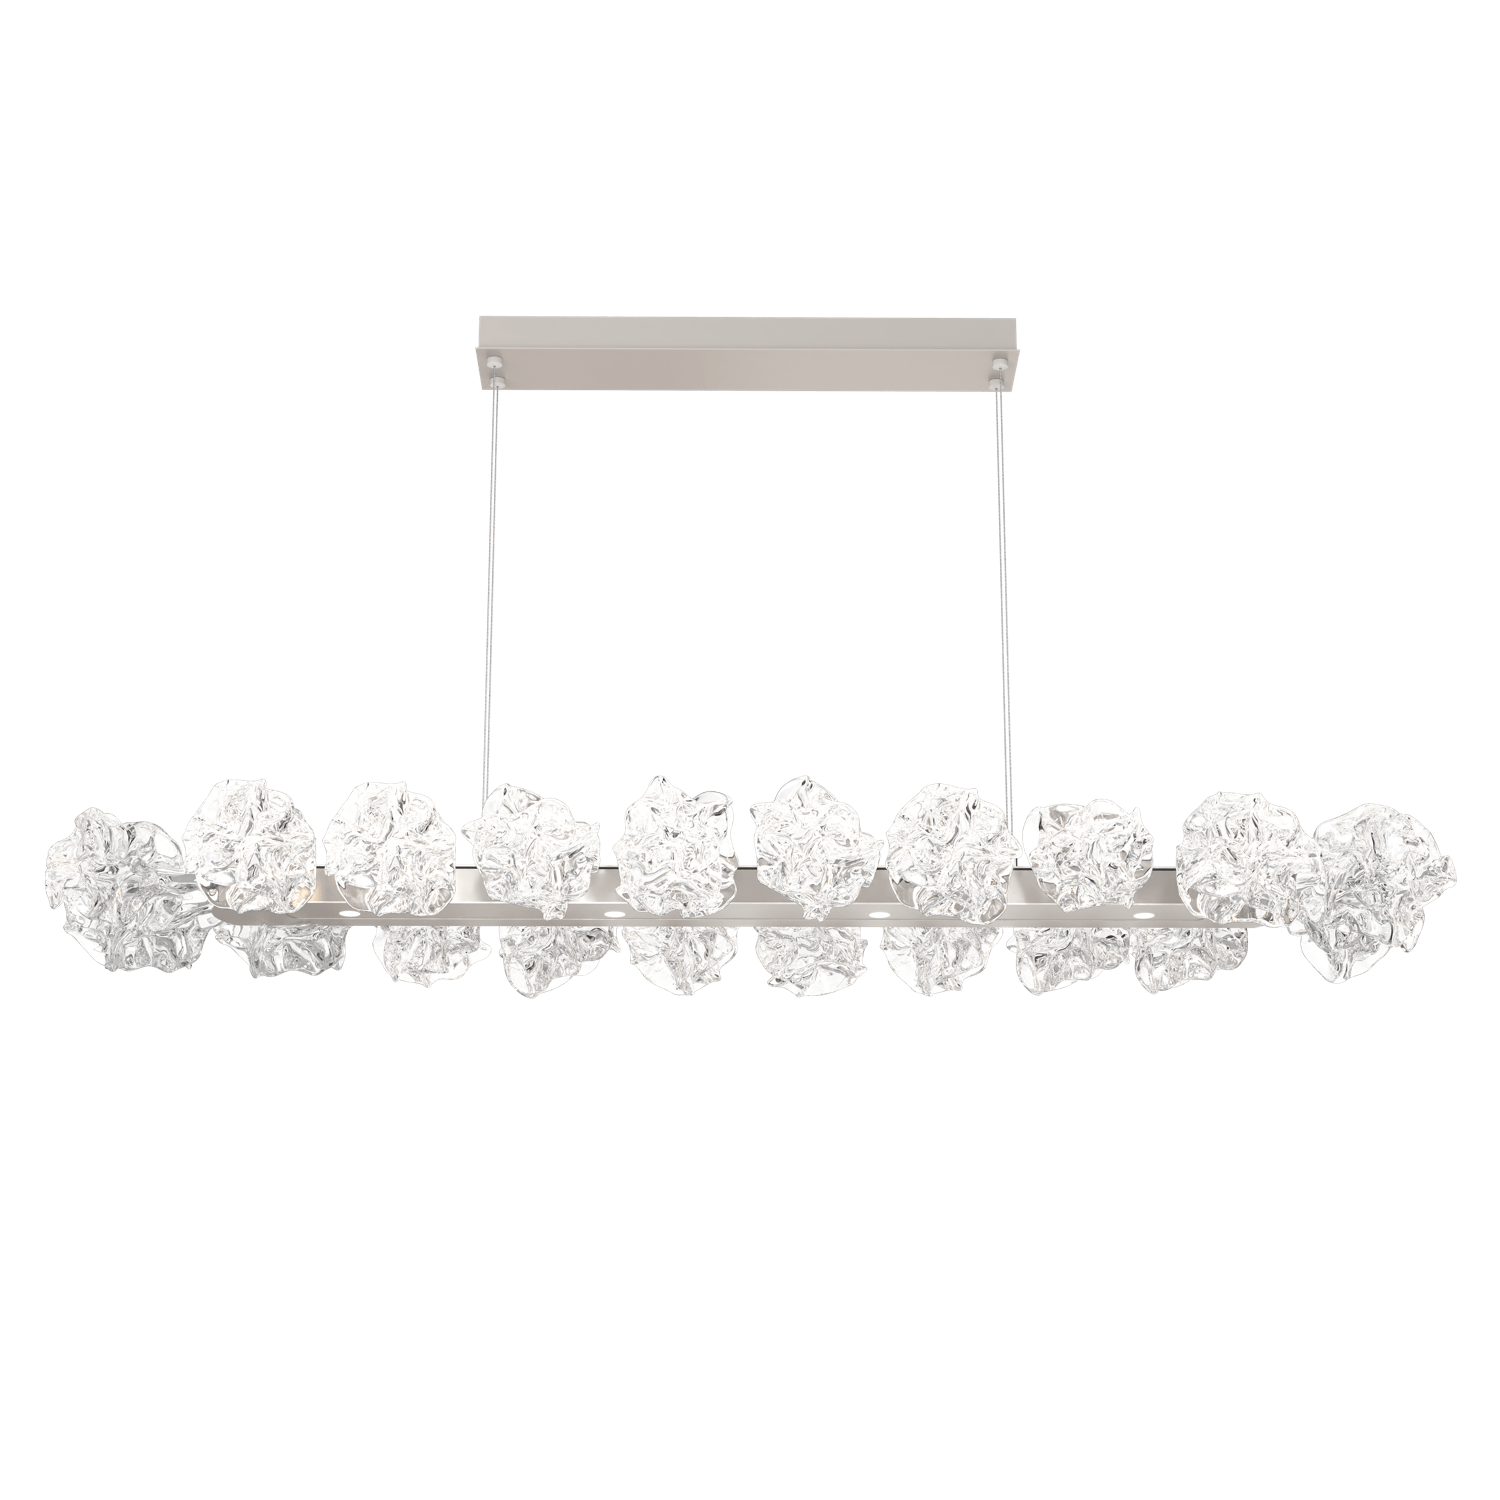 PLB0059-60-BS-Hammerton-Studio-Blossom-60-inch-linear-chandelier-with-metallic-beige-silver-finish-and-clear-handblown-crystal-glass-shades-and-LED-lamping